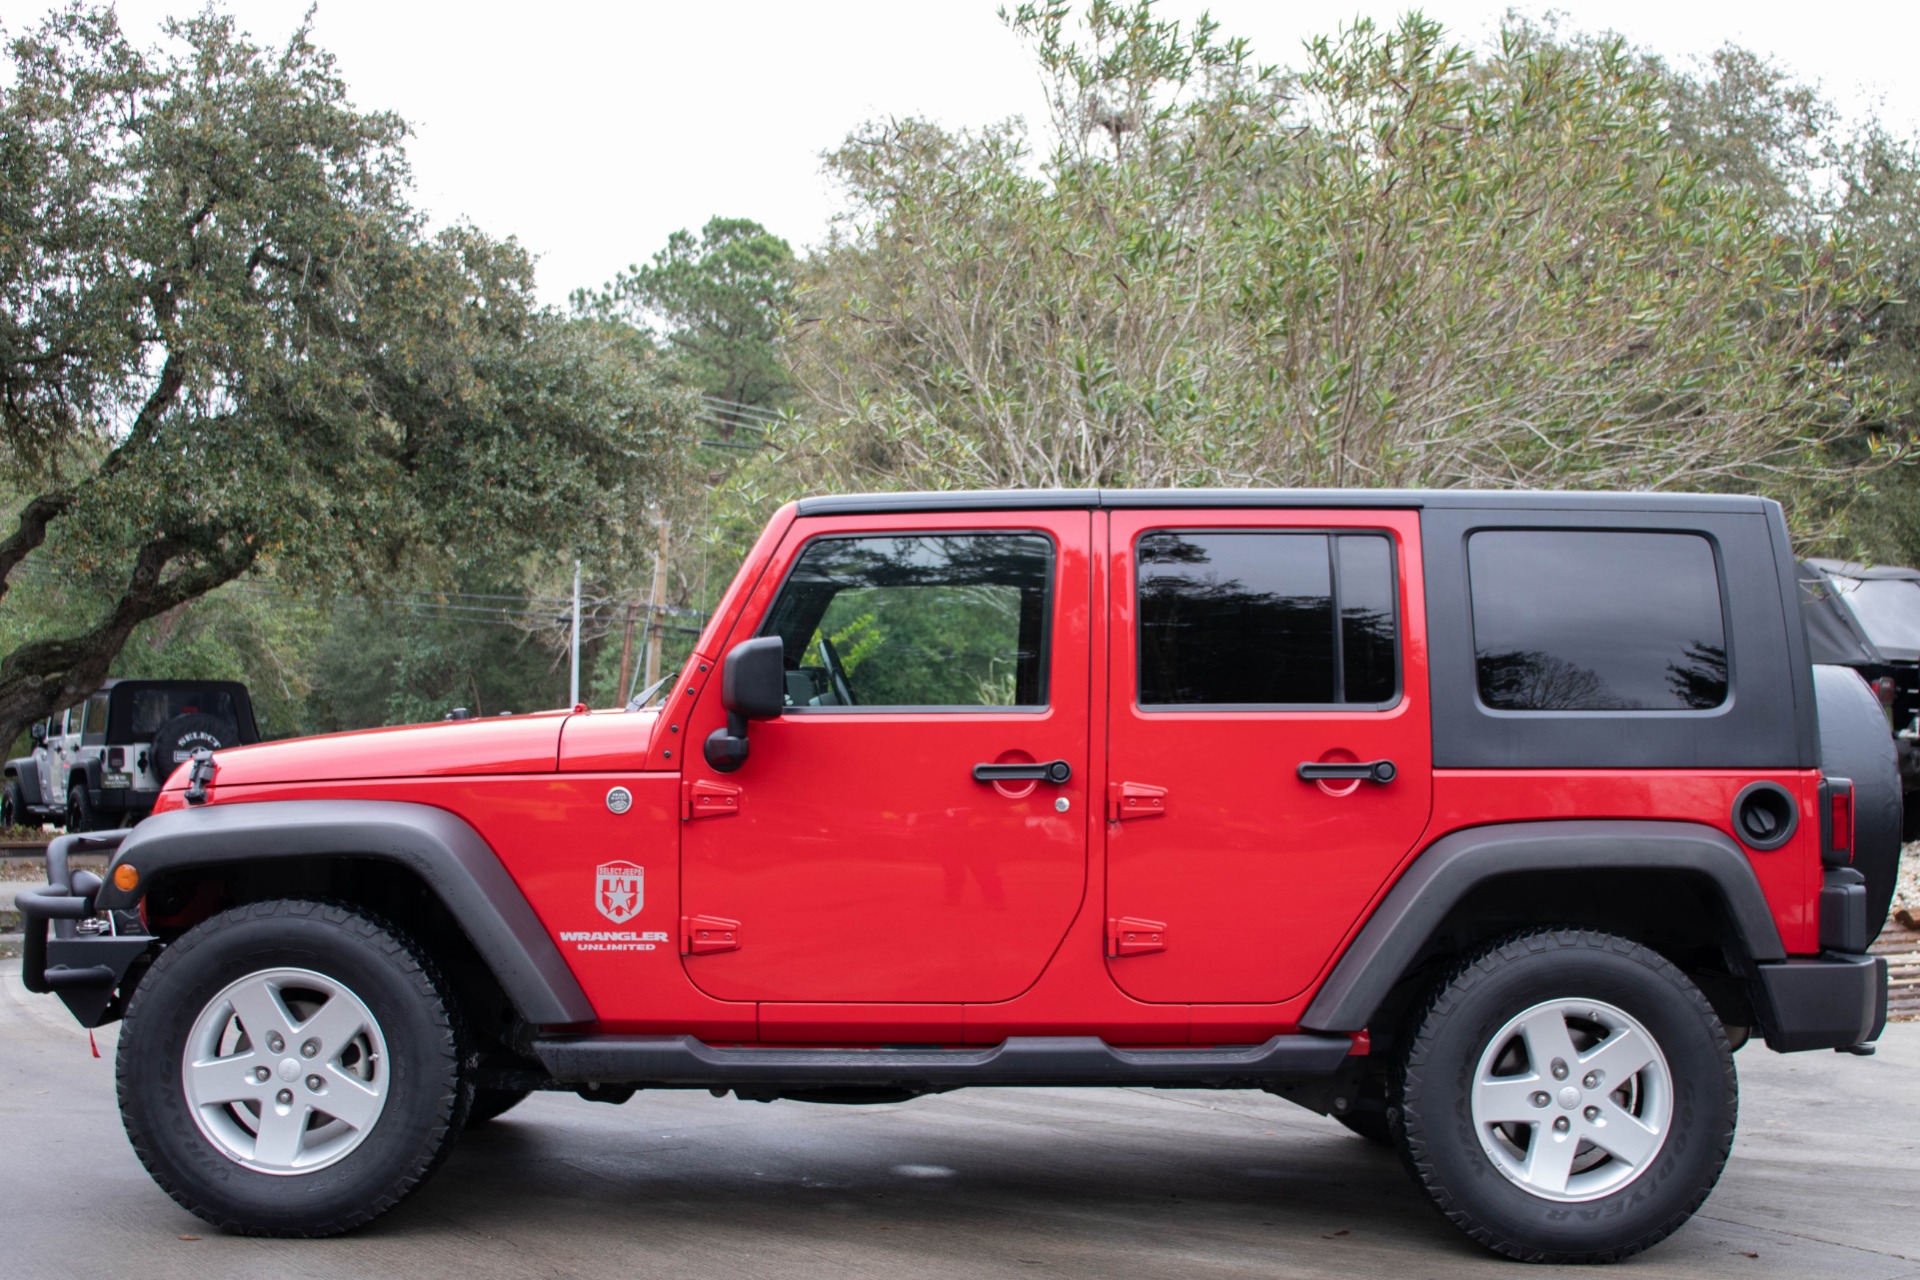 Used 2009 Jeep Wrangler Unlimited X For Sale ($21,995) | Select Jeeps Inc.  Stock #765499